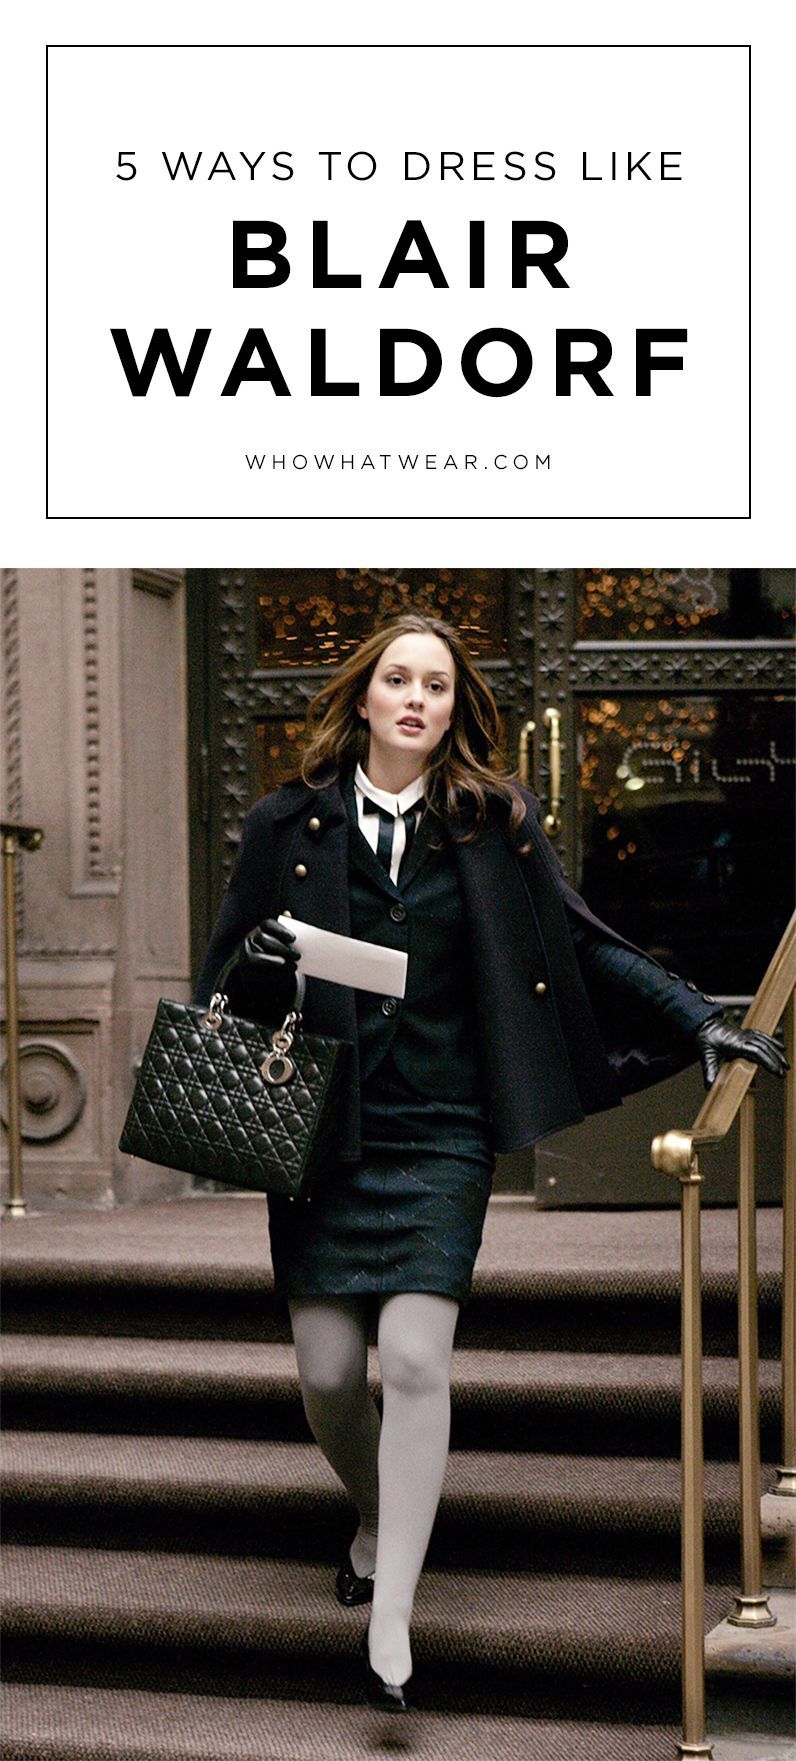 5 Outfits Blair Waldorf Would Wear in 2016 -   23 blair waldorf style
 ideas